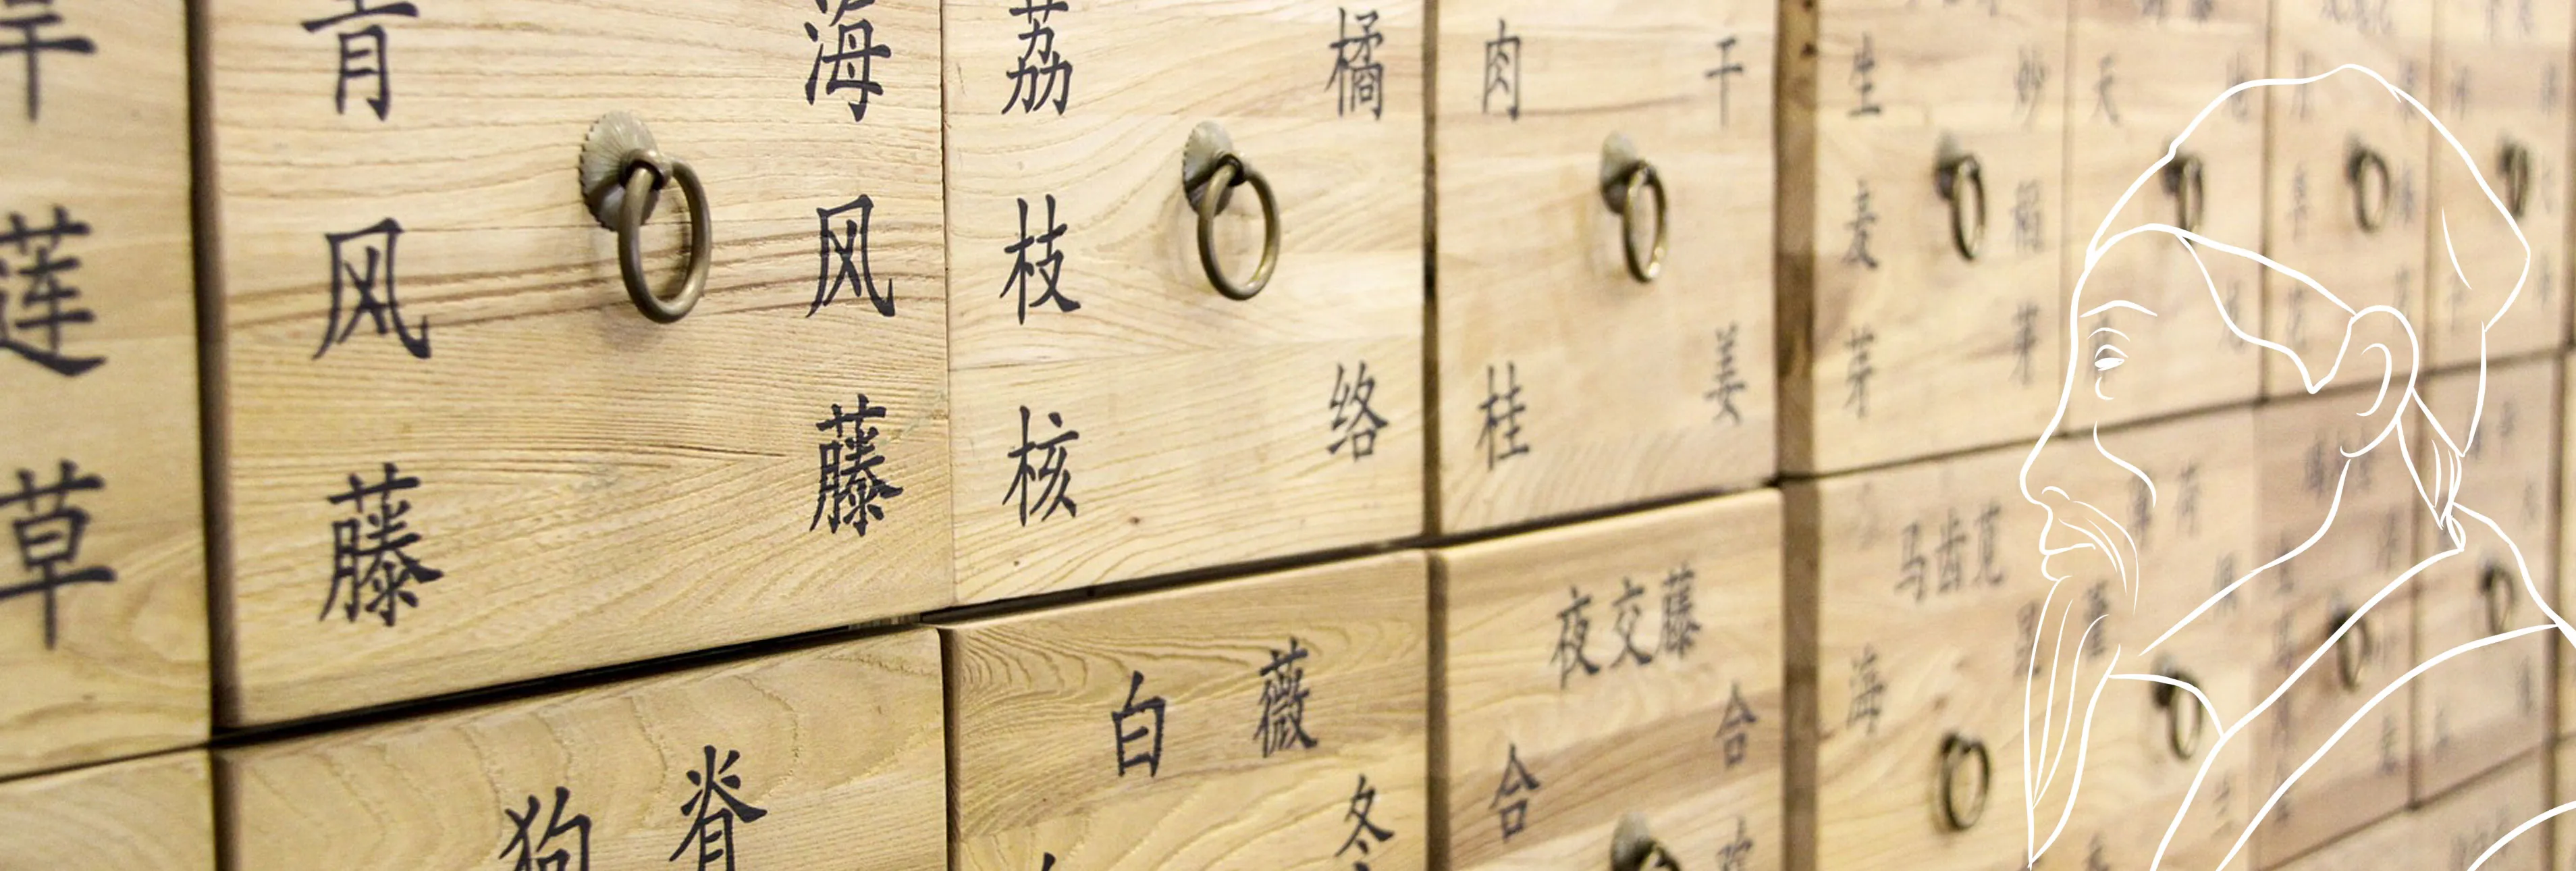 Traditional chinese medicine : Golden rules